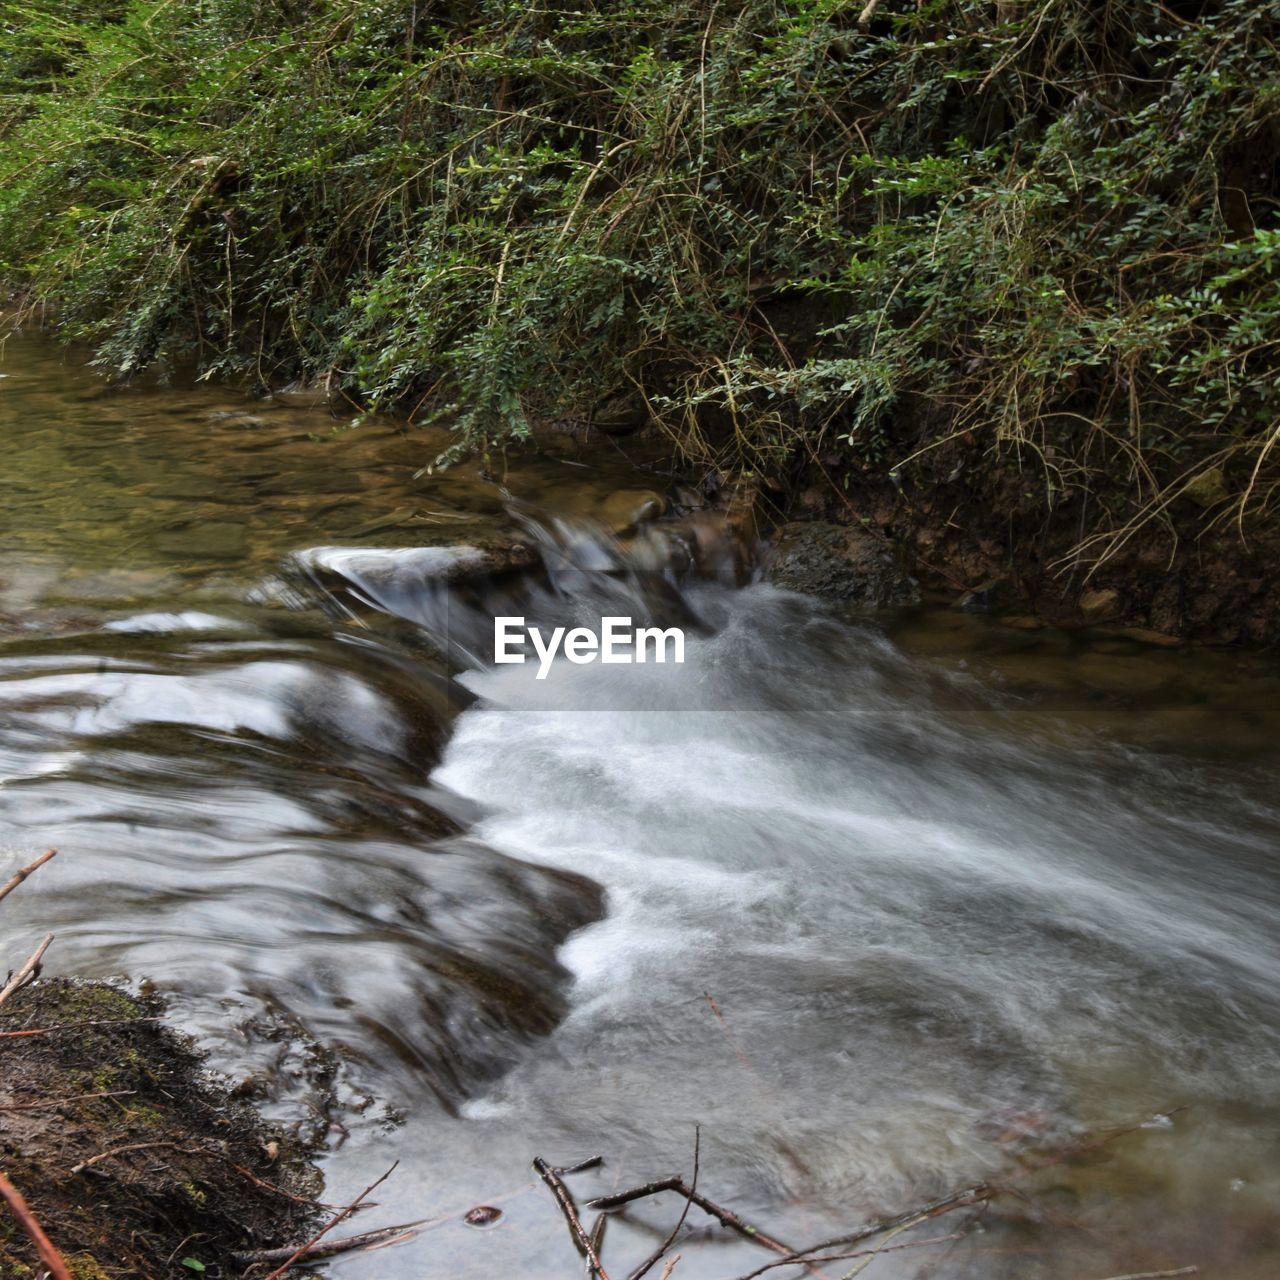 SCENIC VIEW OF WATER FLOWING IN FOREST